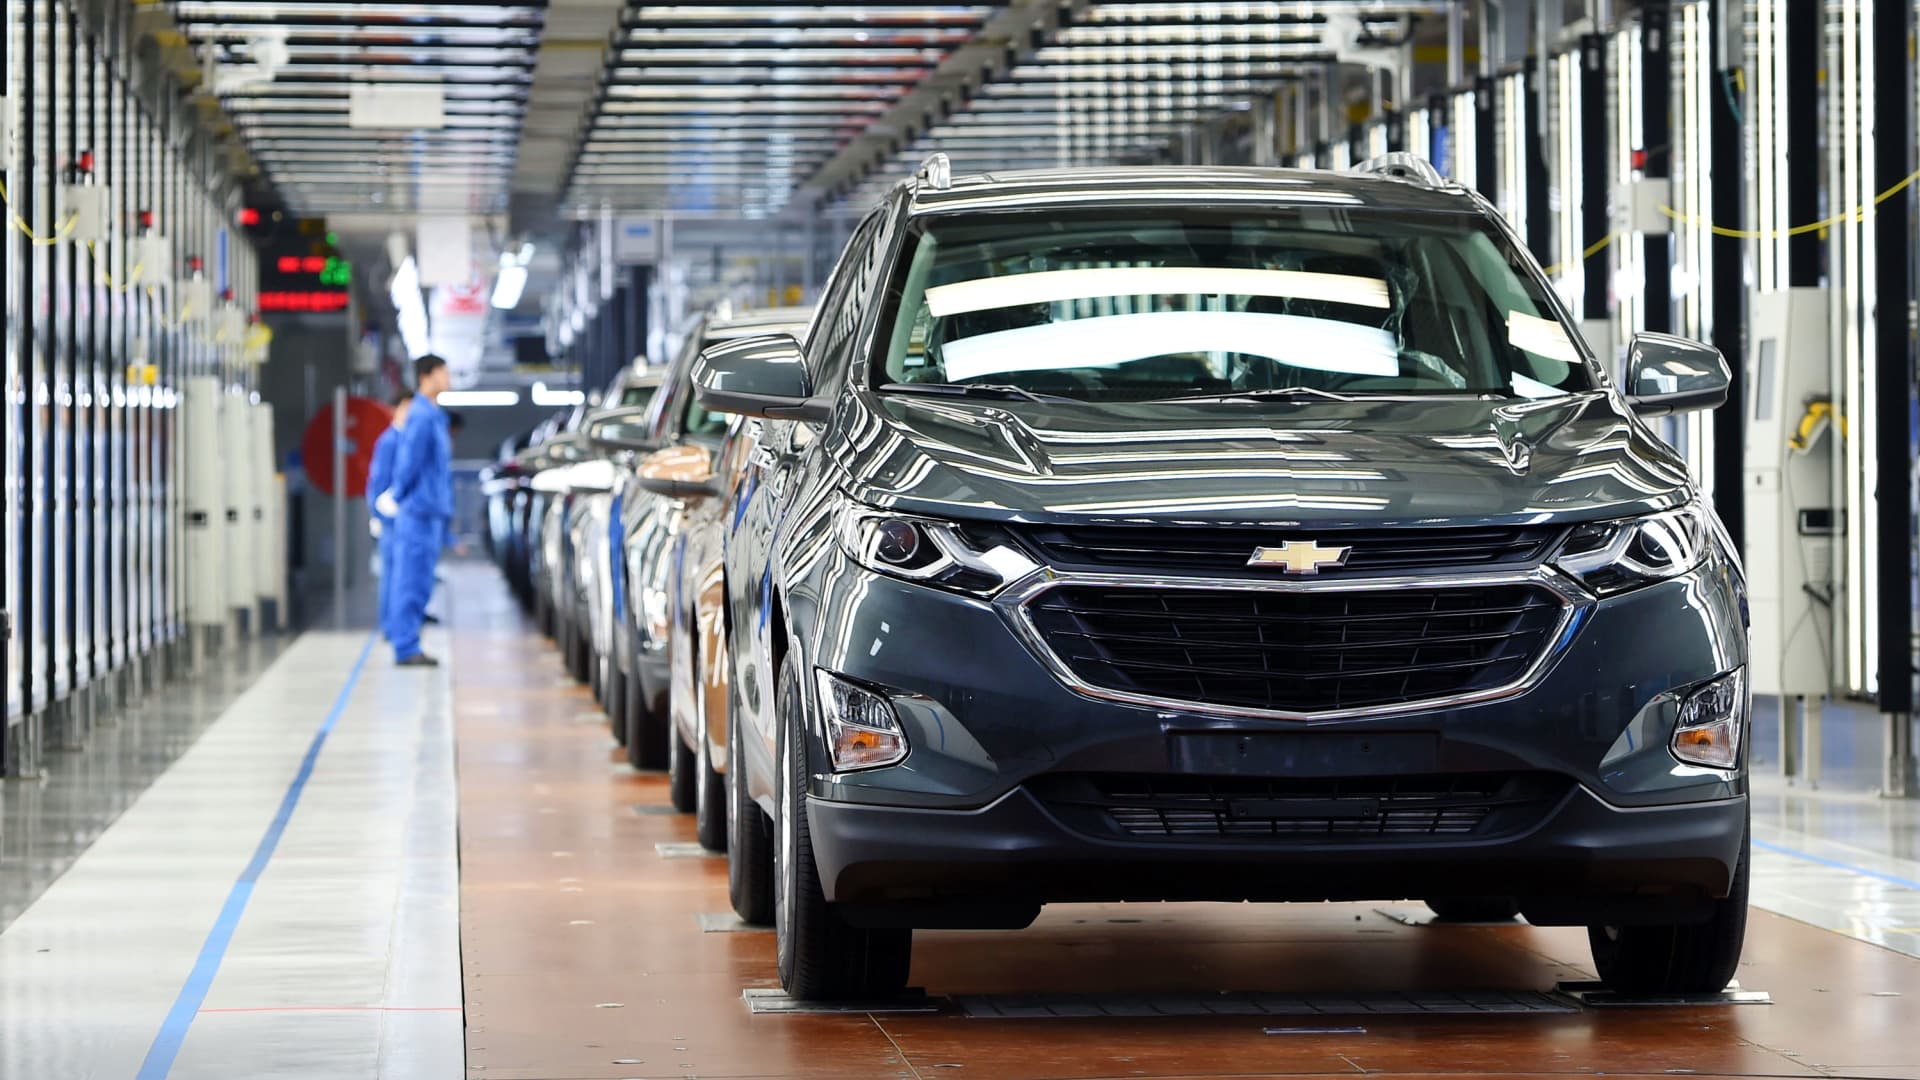 How American automakers lost ground in China